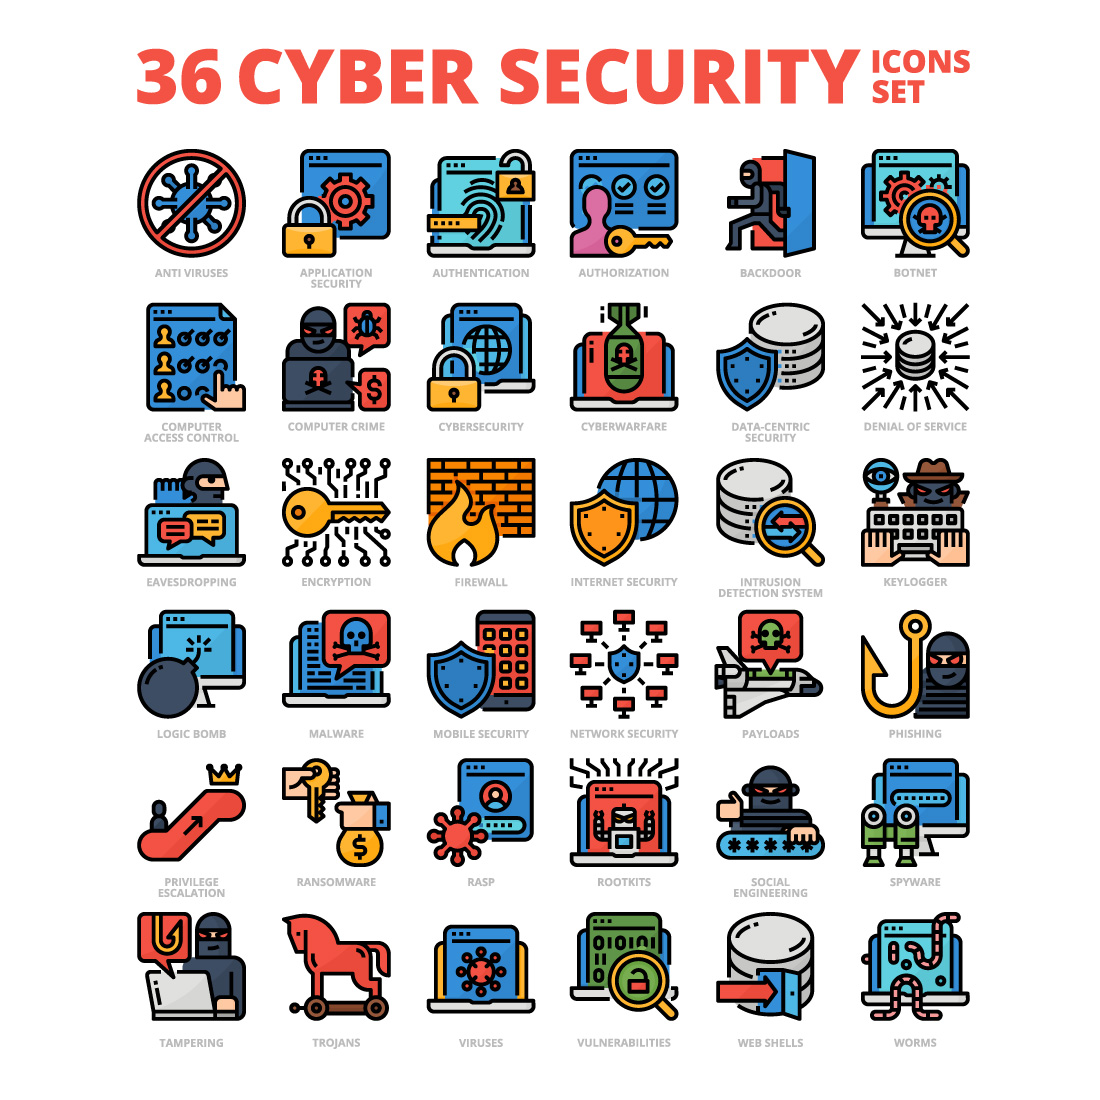 36 Cyber Security Icons Set x 4 Styles cover image.